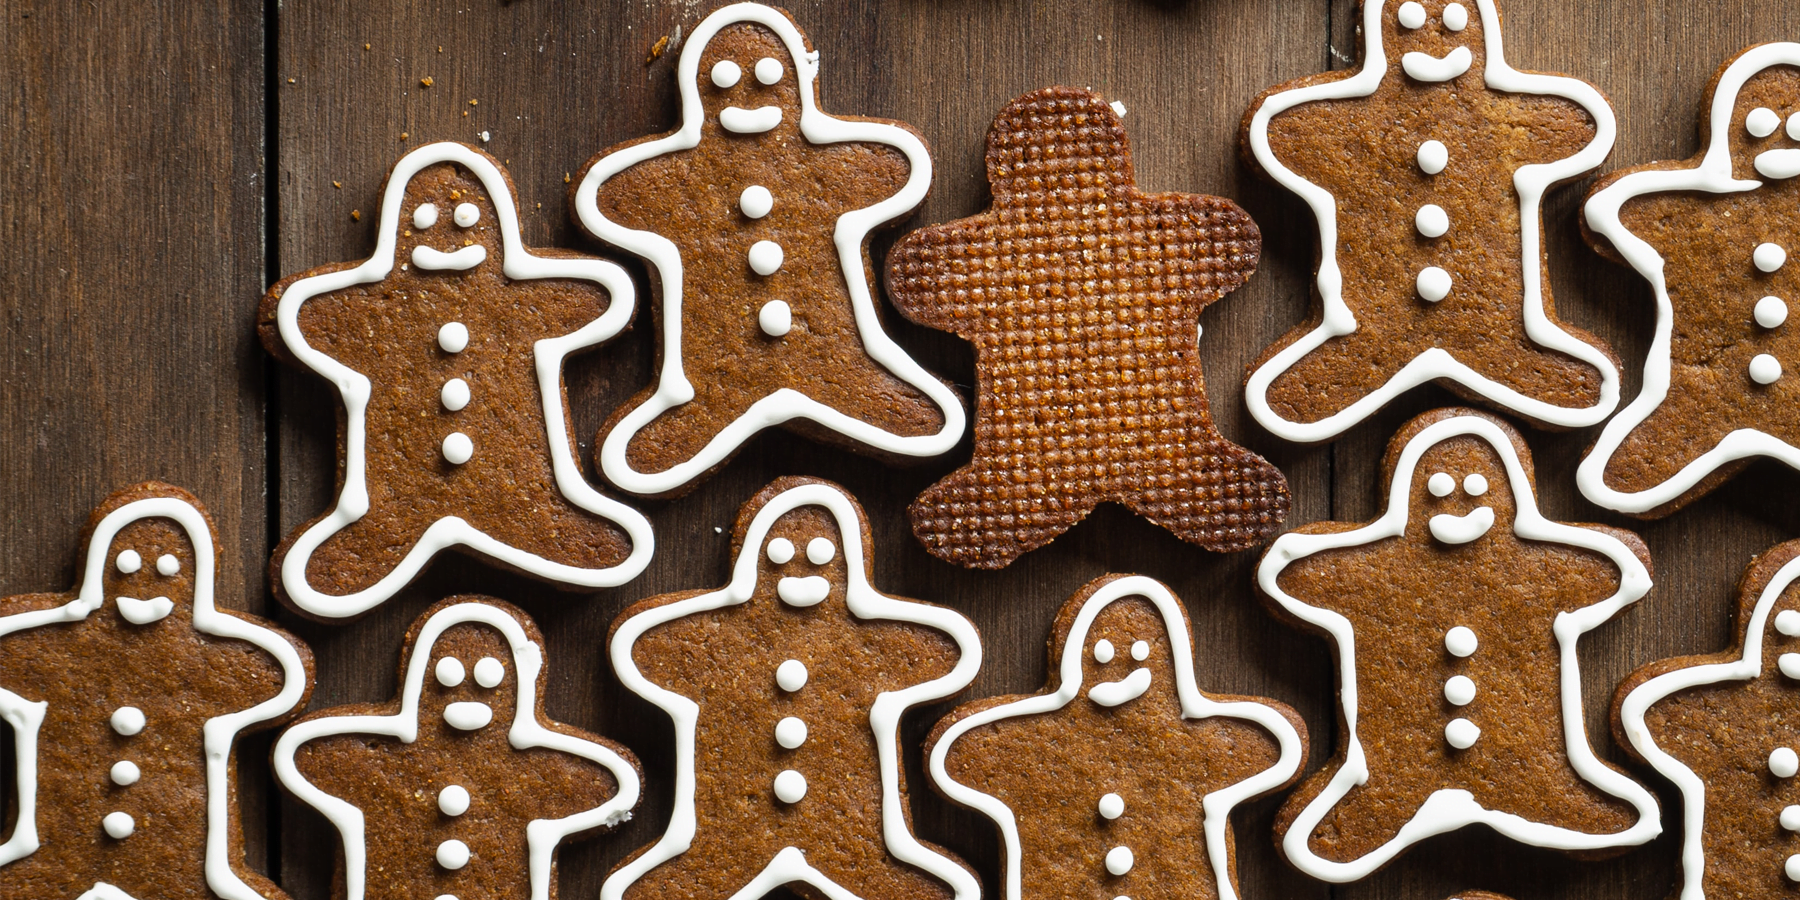 A cluster of smiling gingerbread people